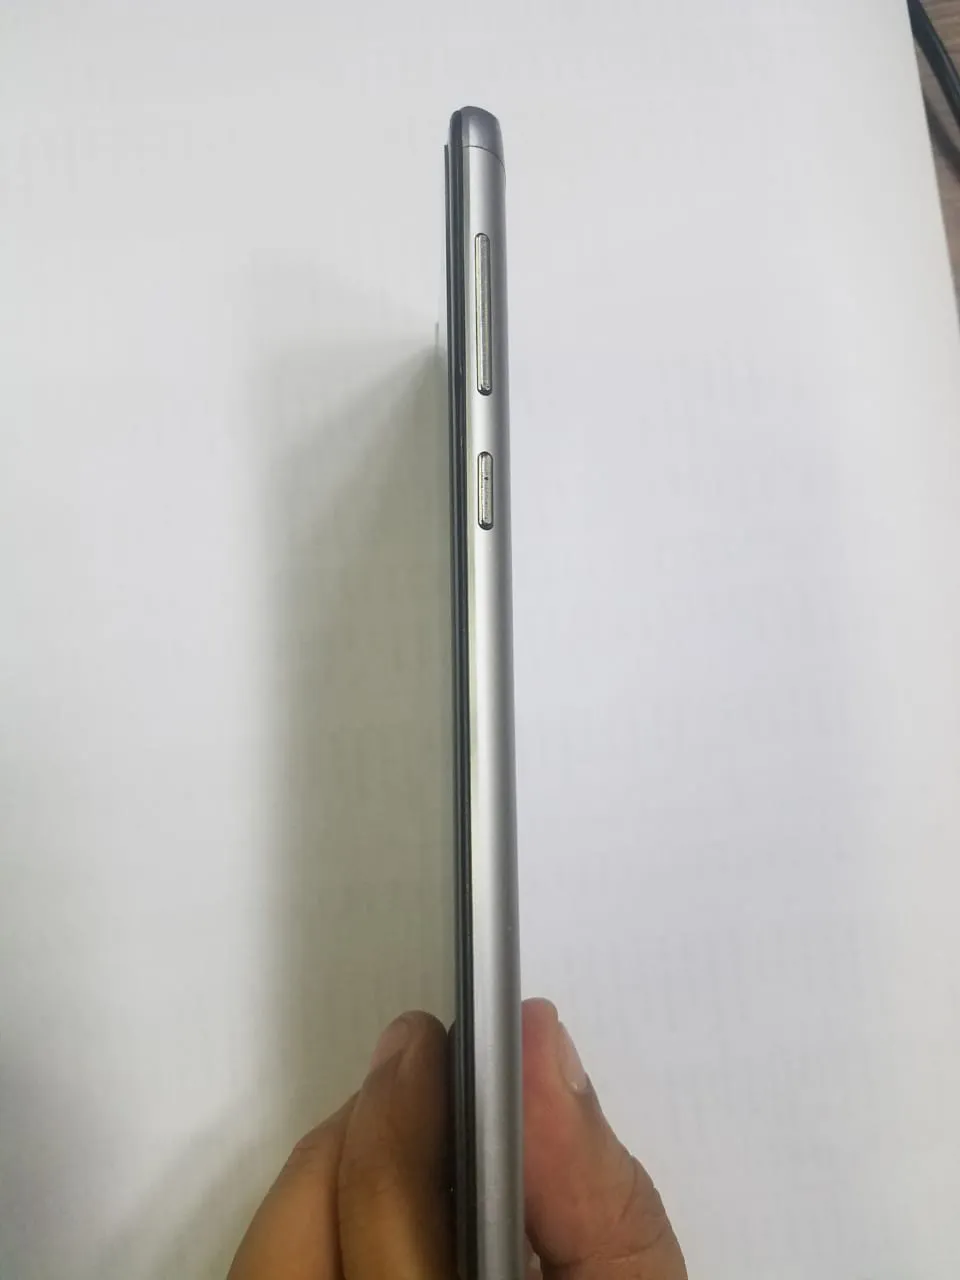 honor 6x gaurnteed non repaired condition 10/10 - photo 2